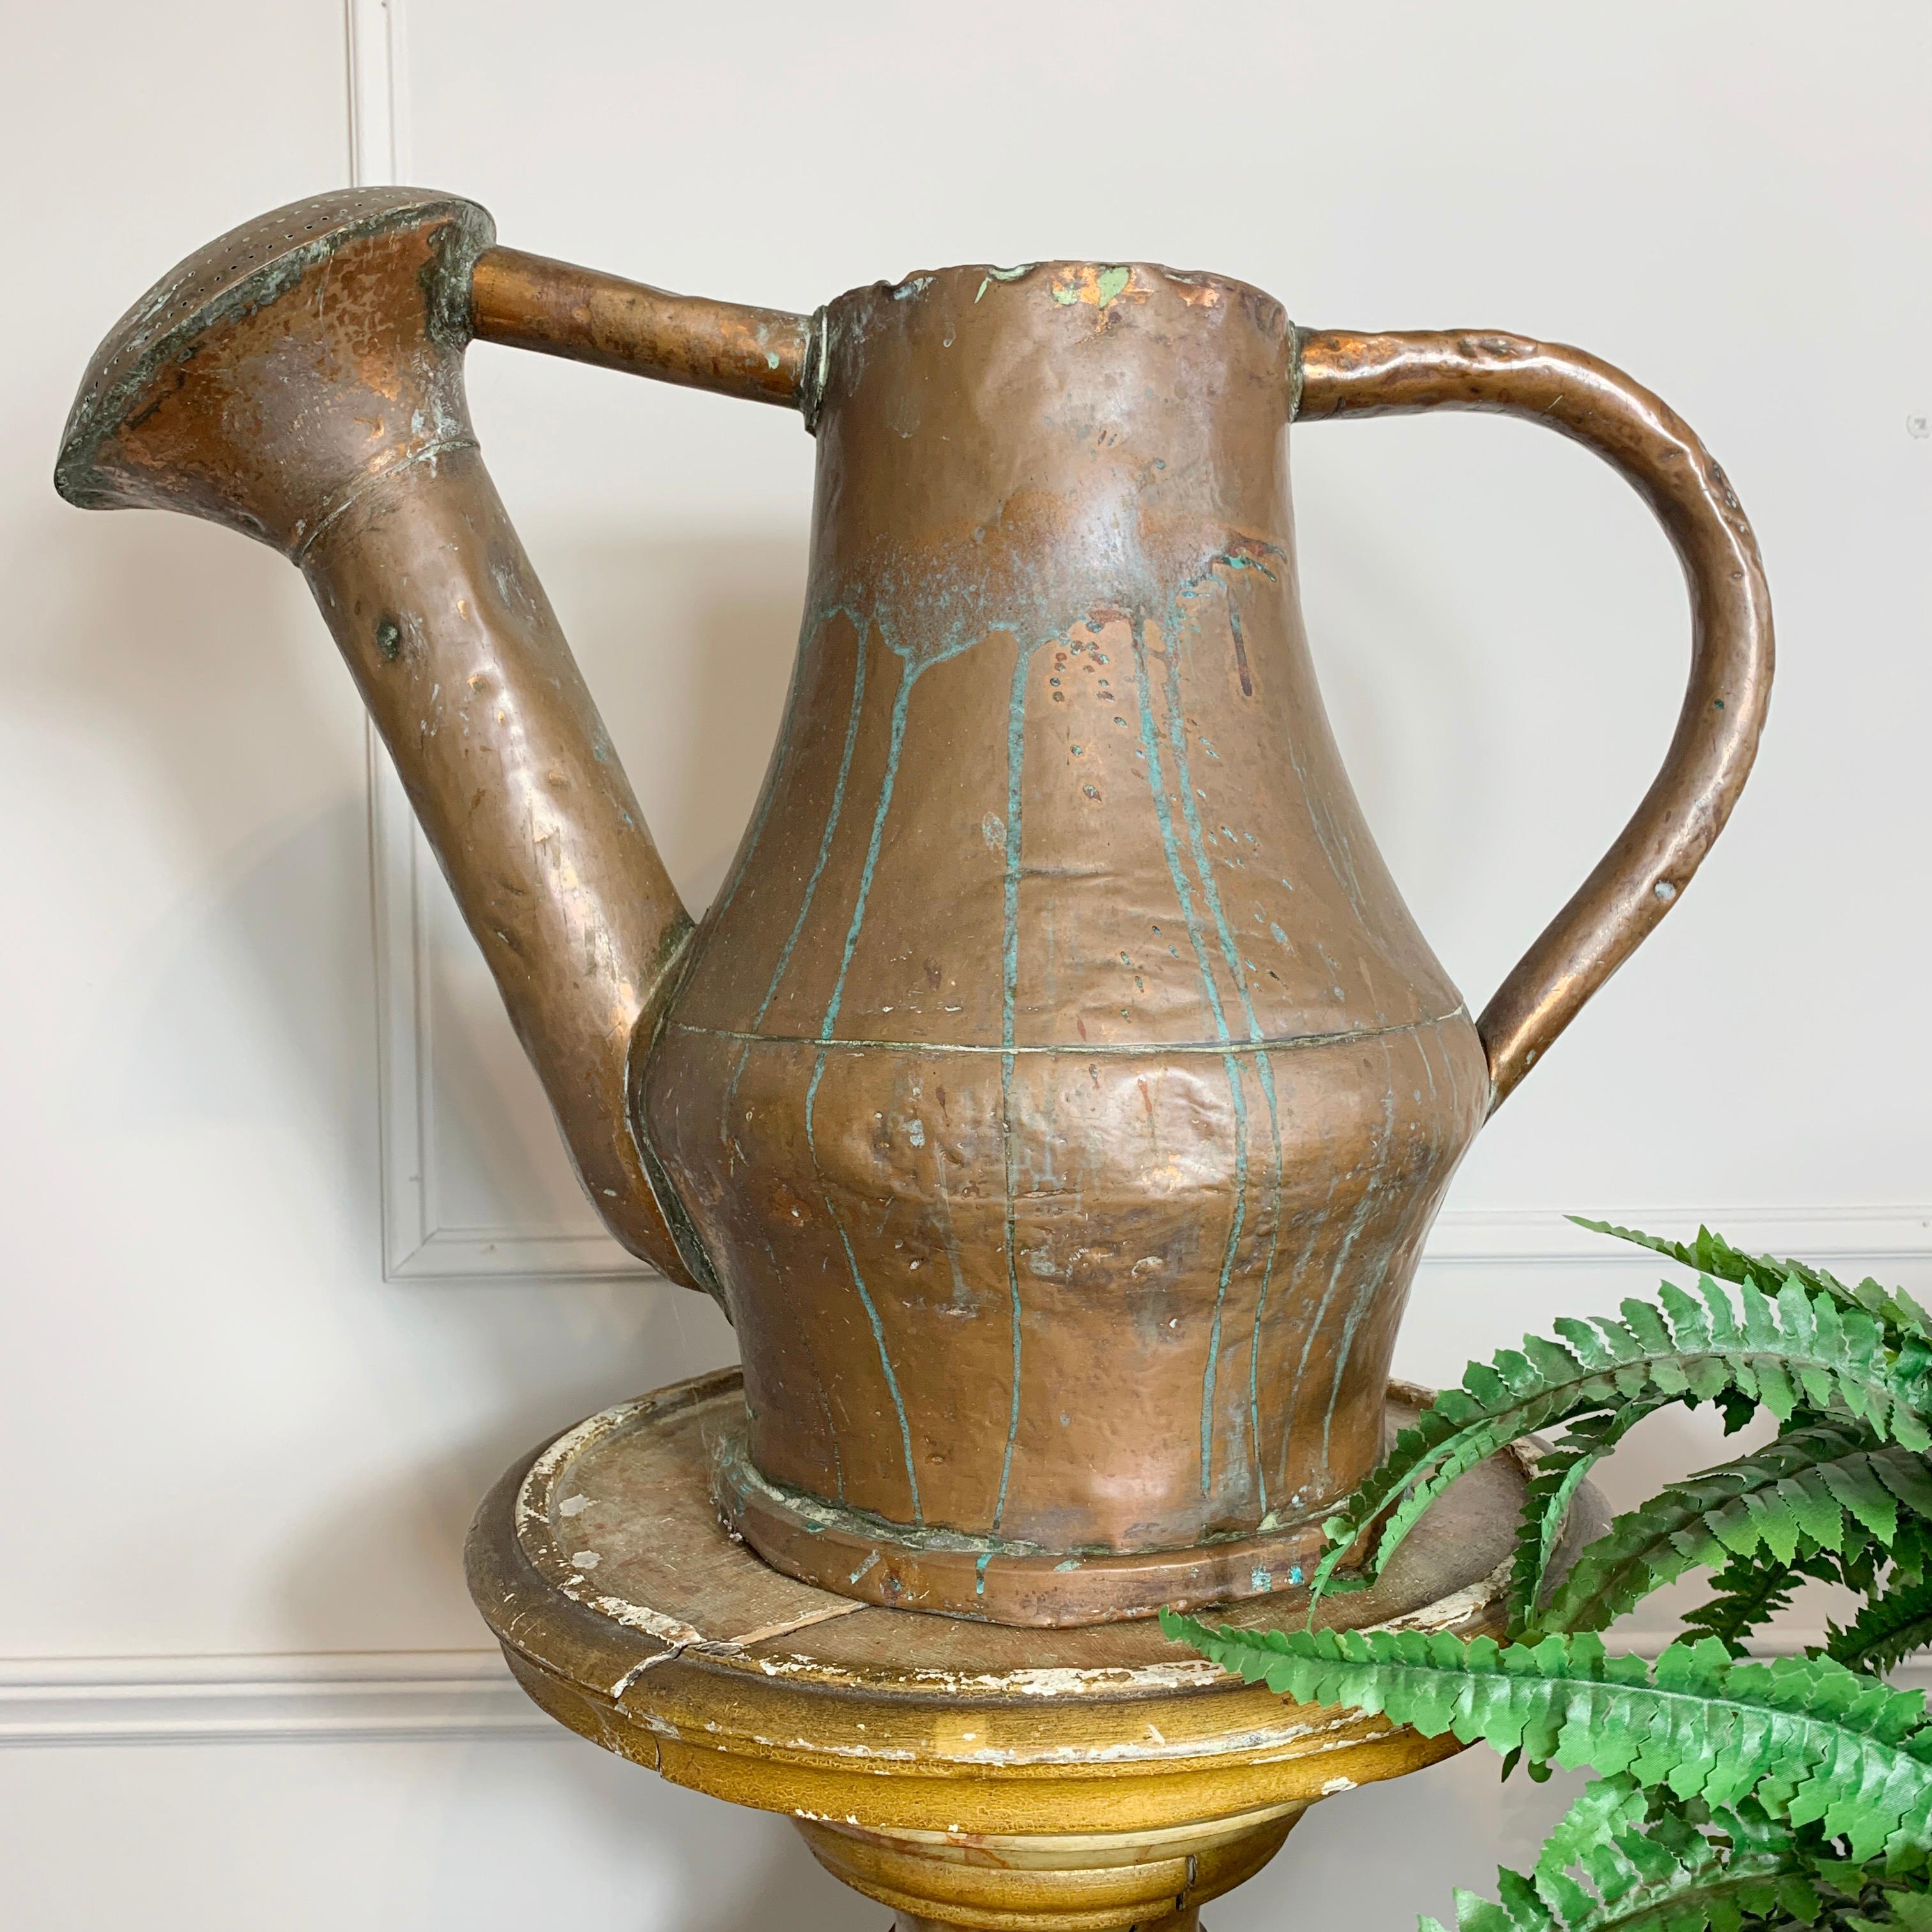 19th century French copper handcrafted watering can
Measures: 39cm height, 52cm width, 25cm depth
This can may have small leaks due to age, great for decorative use.